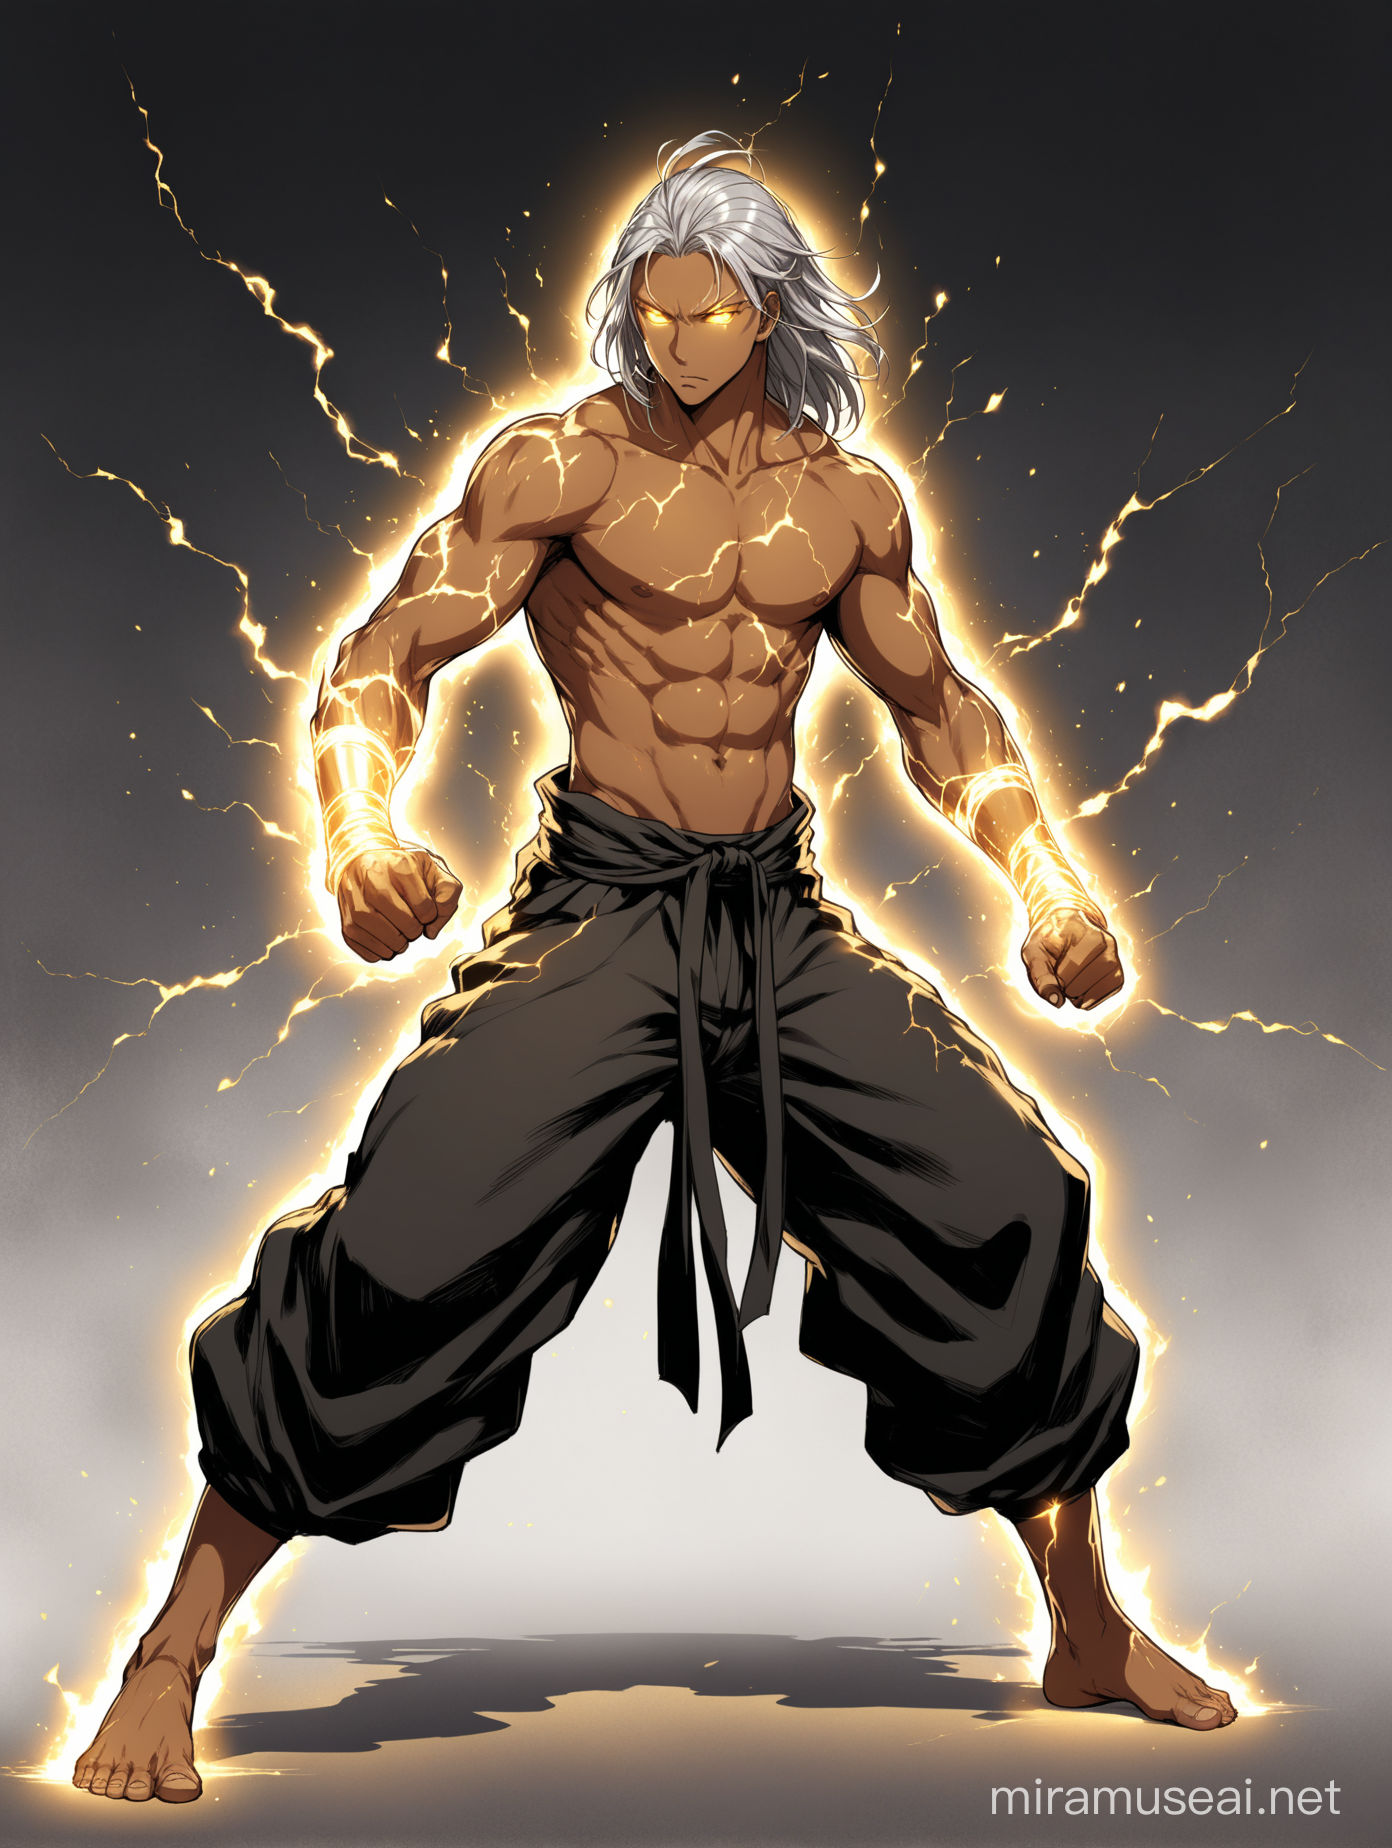 A tan man with light gray hair and golden eyes. His hair is very long, he is shirtless and there are cracks in his body that are glowing black. He has baggy pants on with wraps around them. His pants are black. He is in a fighting stance. This is a full body image, and he is facing left. His hair is long